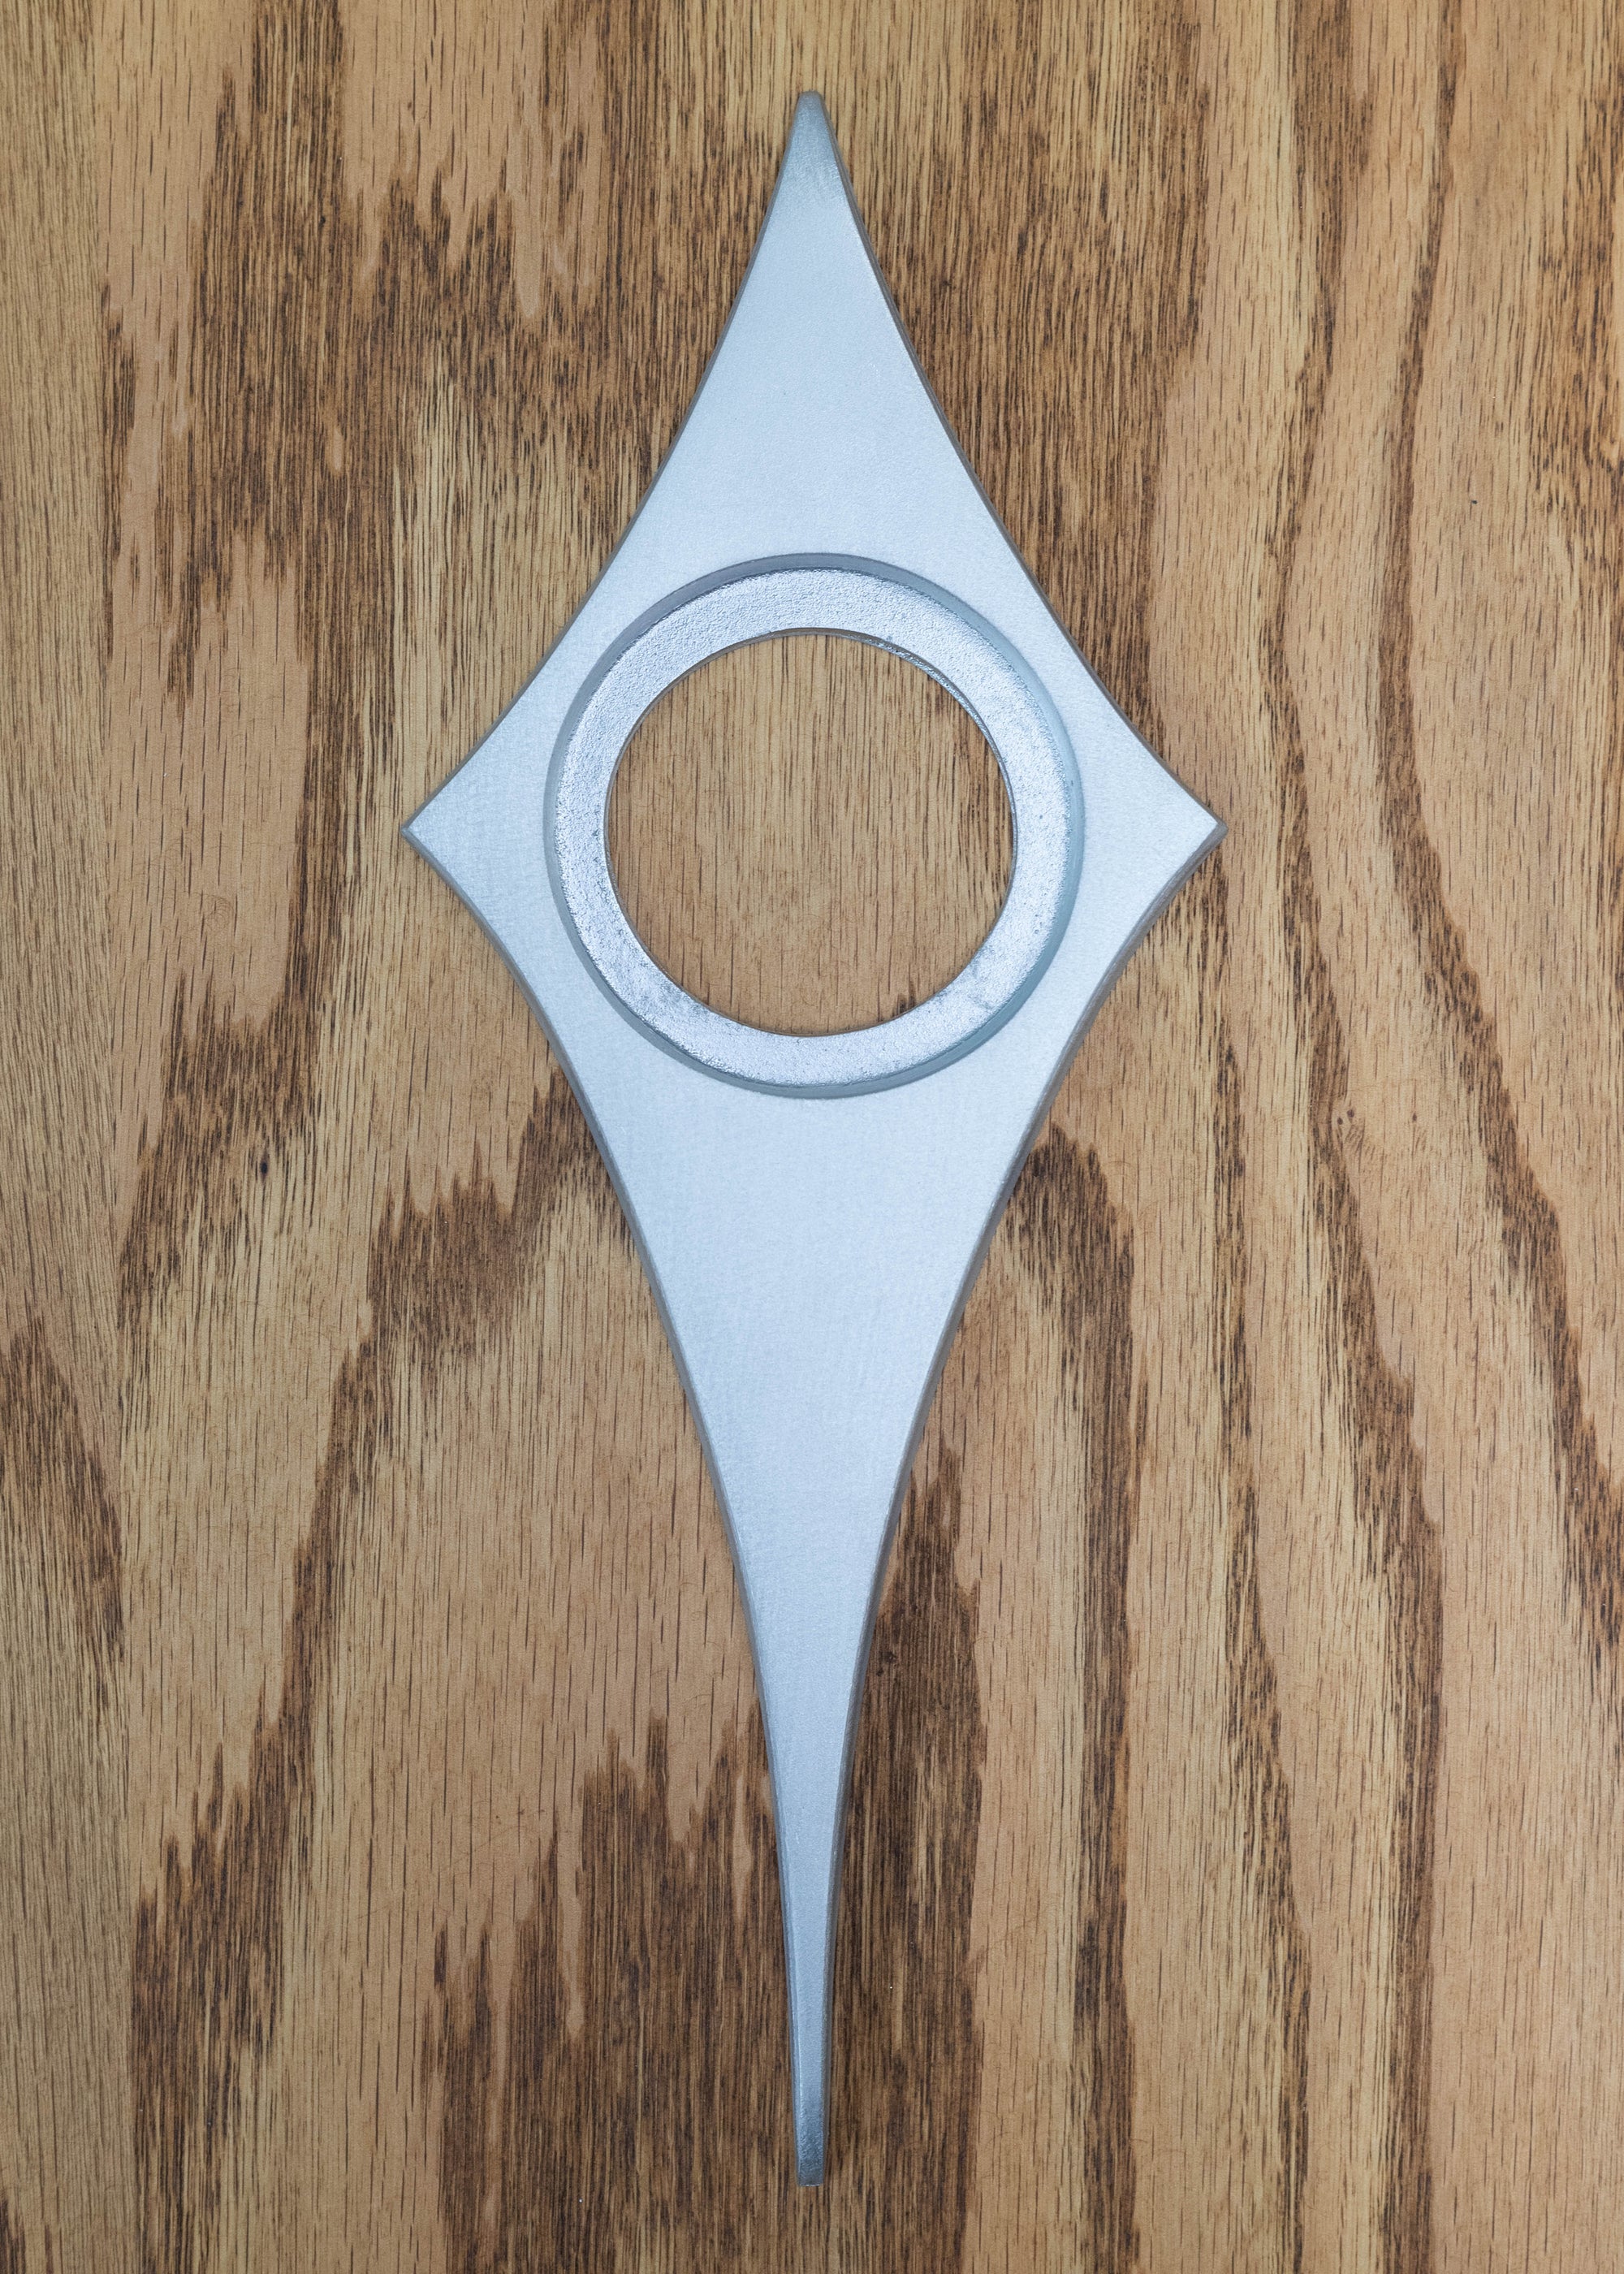 Bare aluminum comet escutcheon. There is no powder coating, so you can paint it whatever color you would like. The bare aluminum is brushed smooth and is a bright silver.